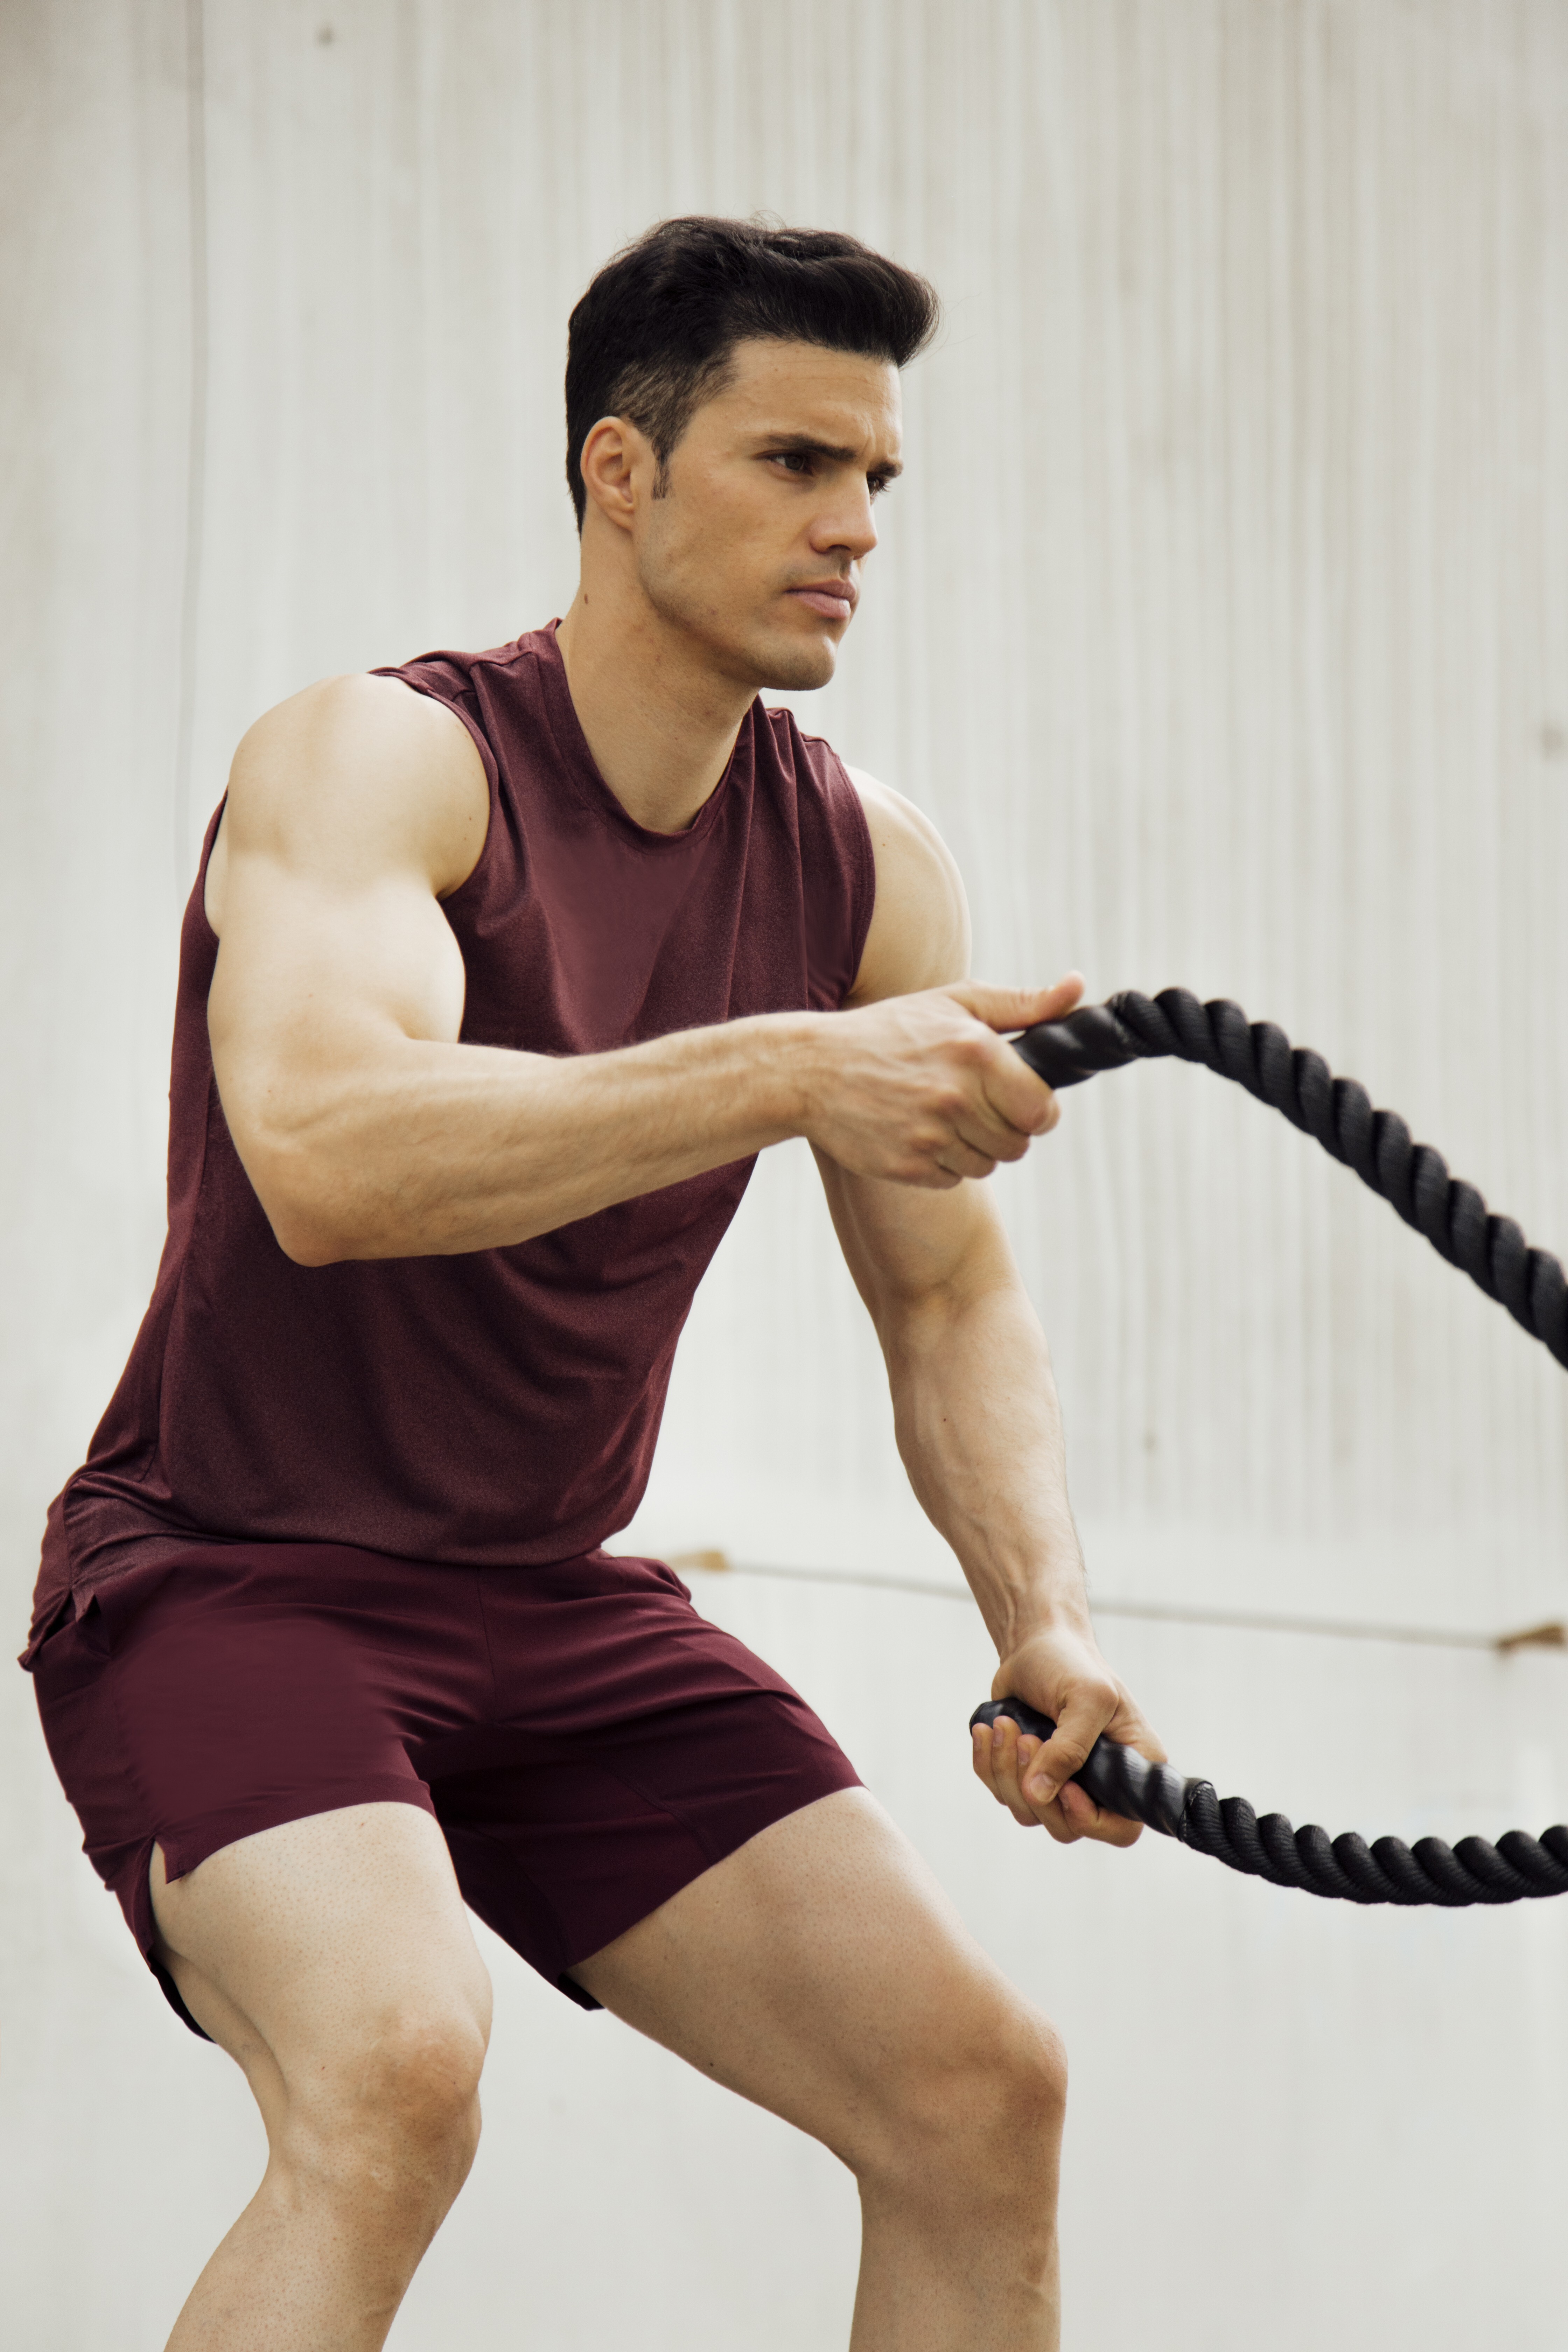 Workout gear from Los Angeles-based label Centric.